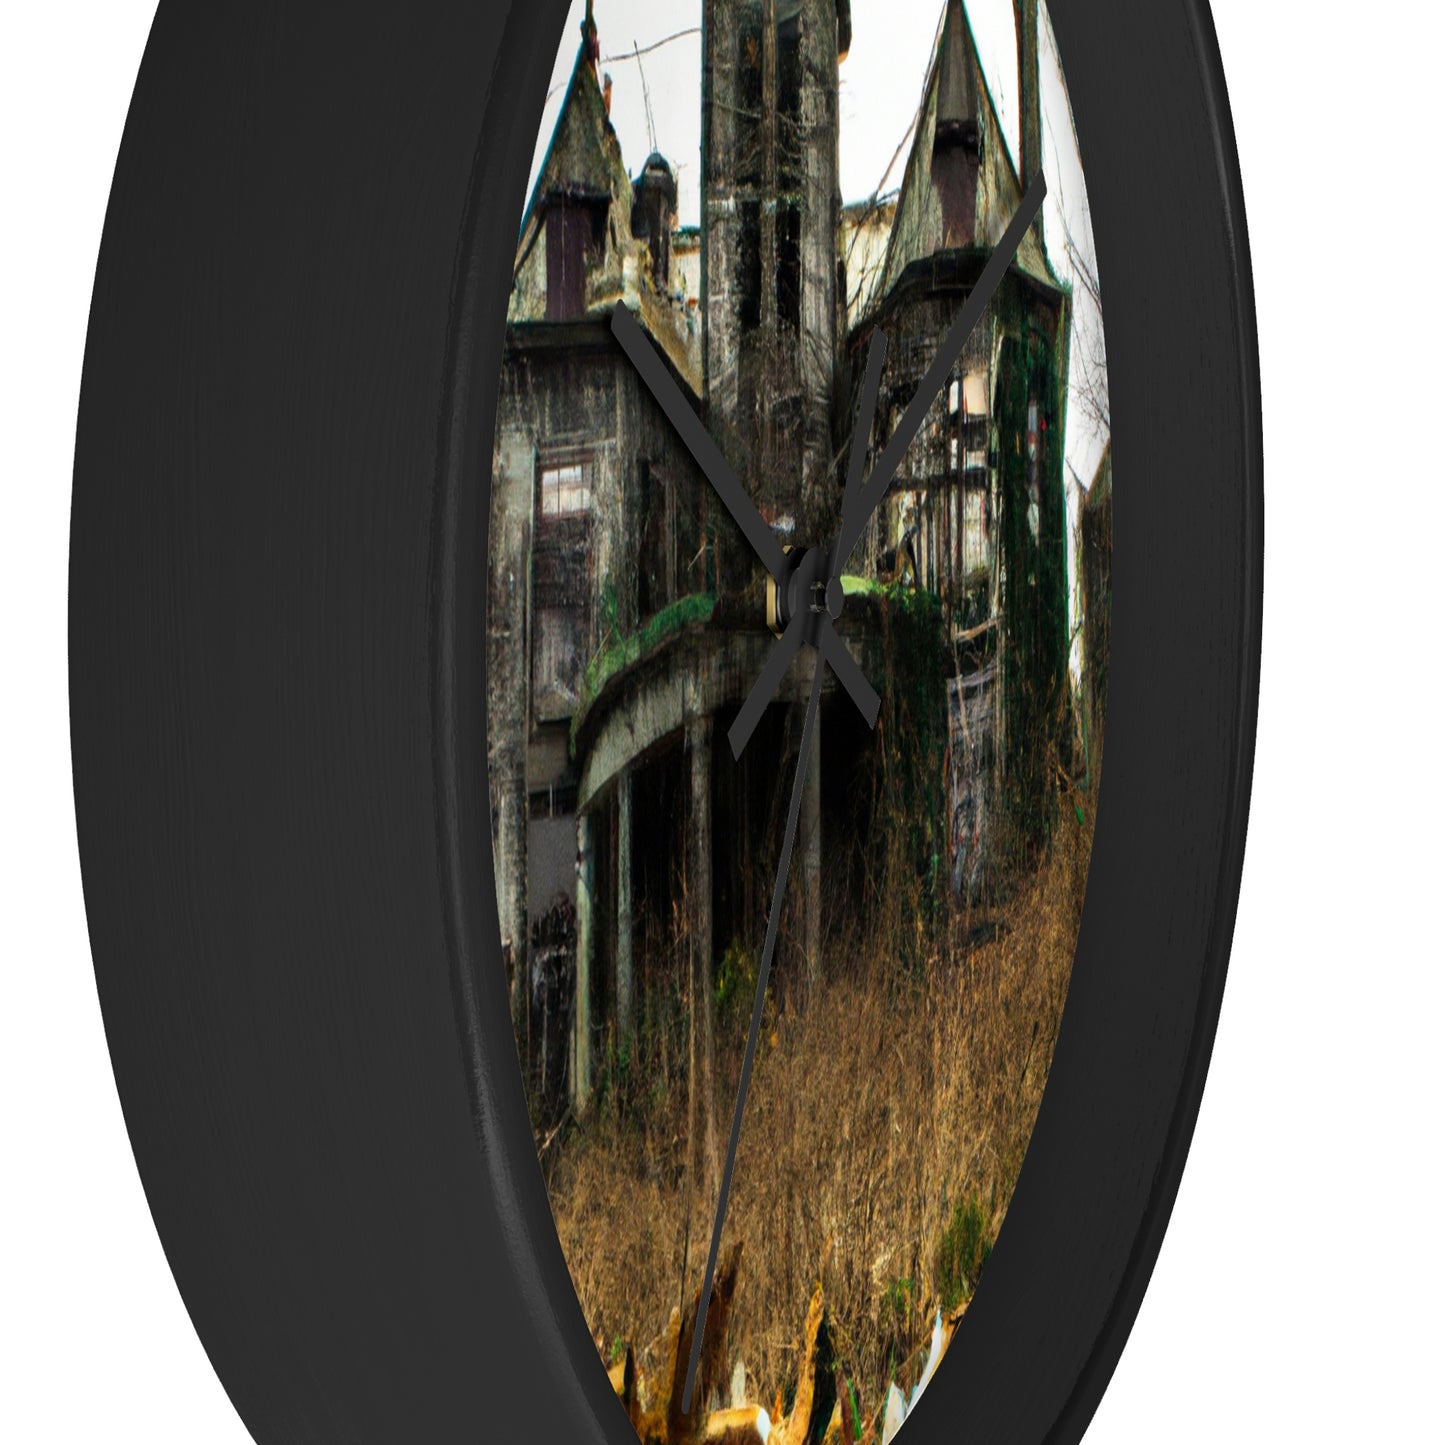 "The Ghastly Groans of the Forgotten Castle" - The Alien Wall Clock